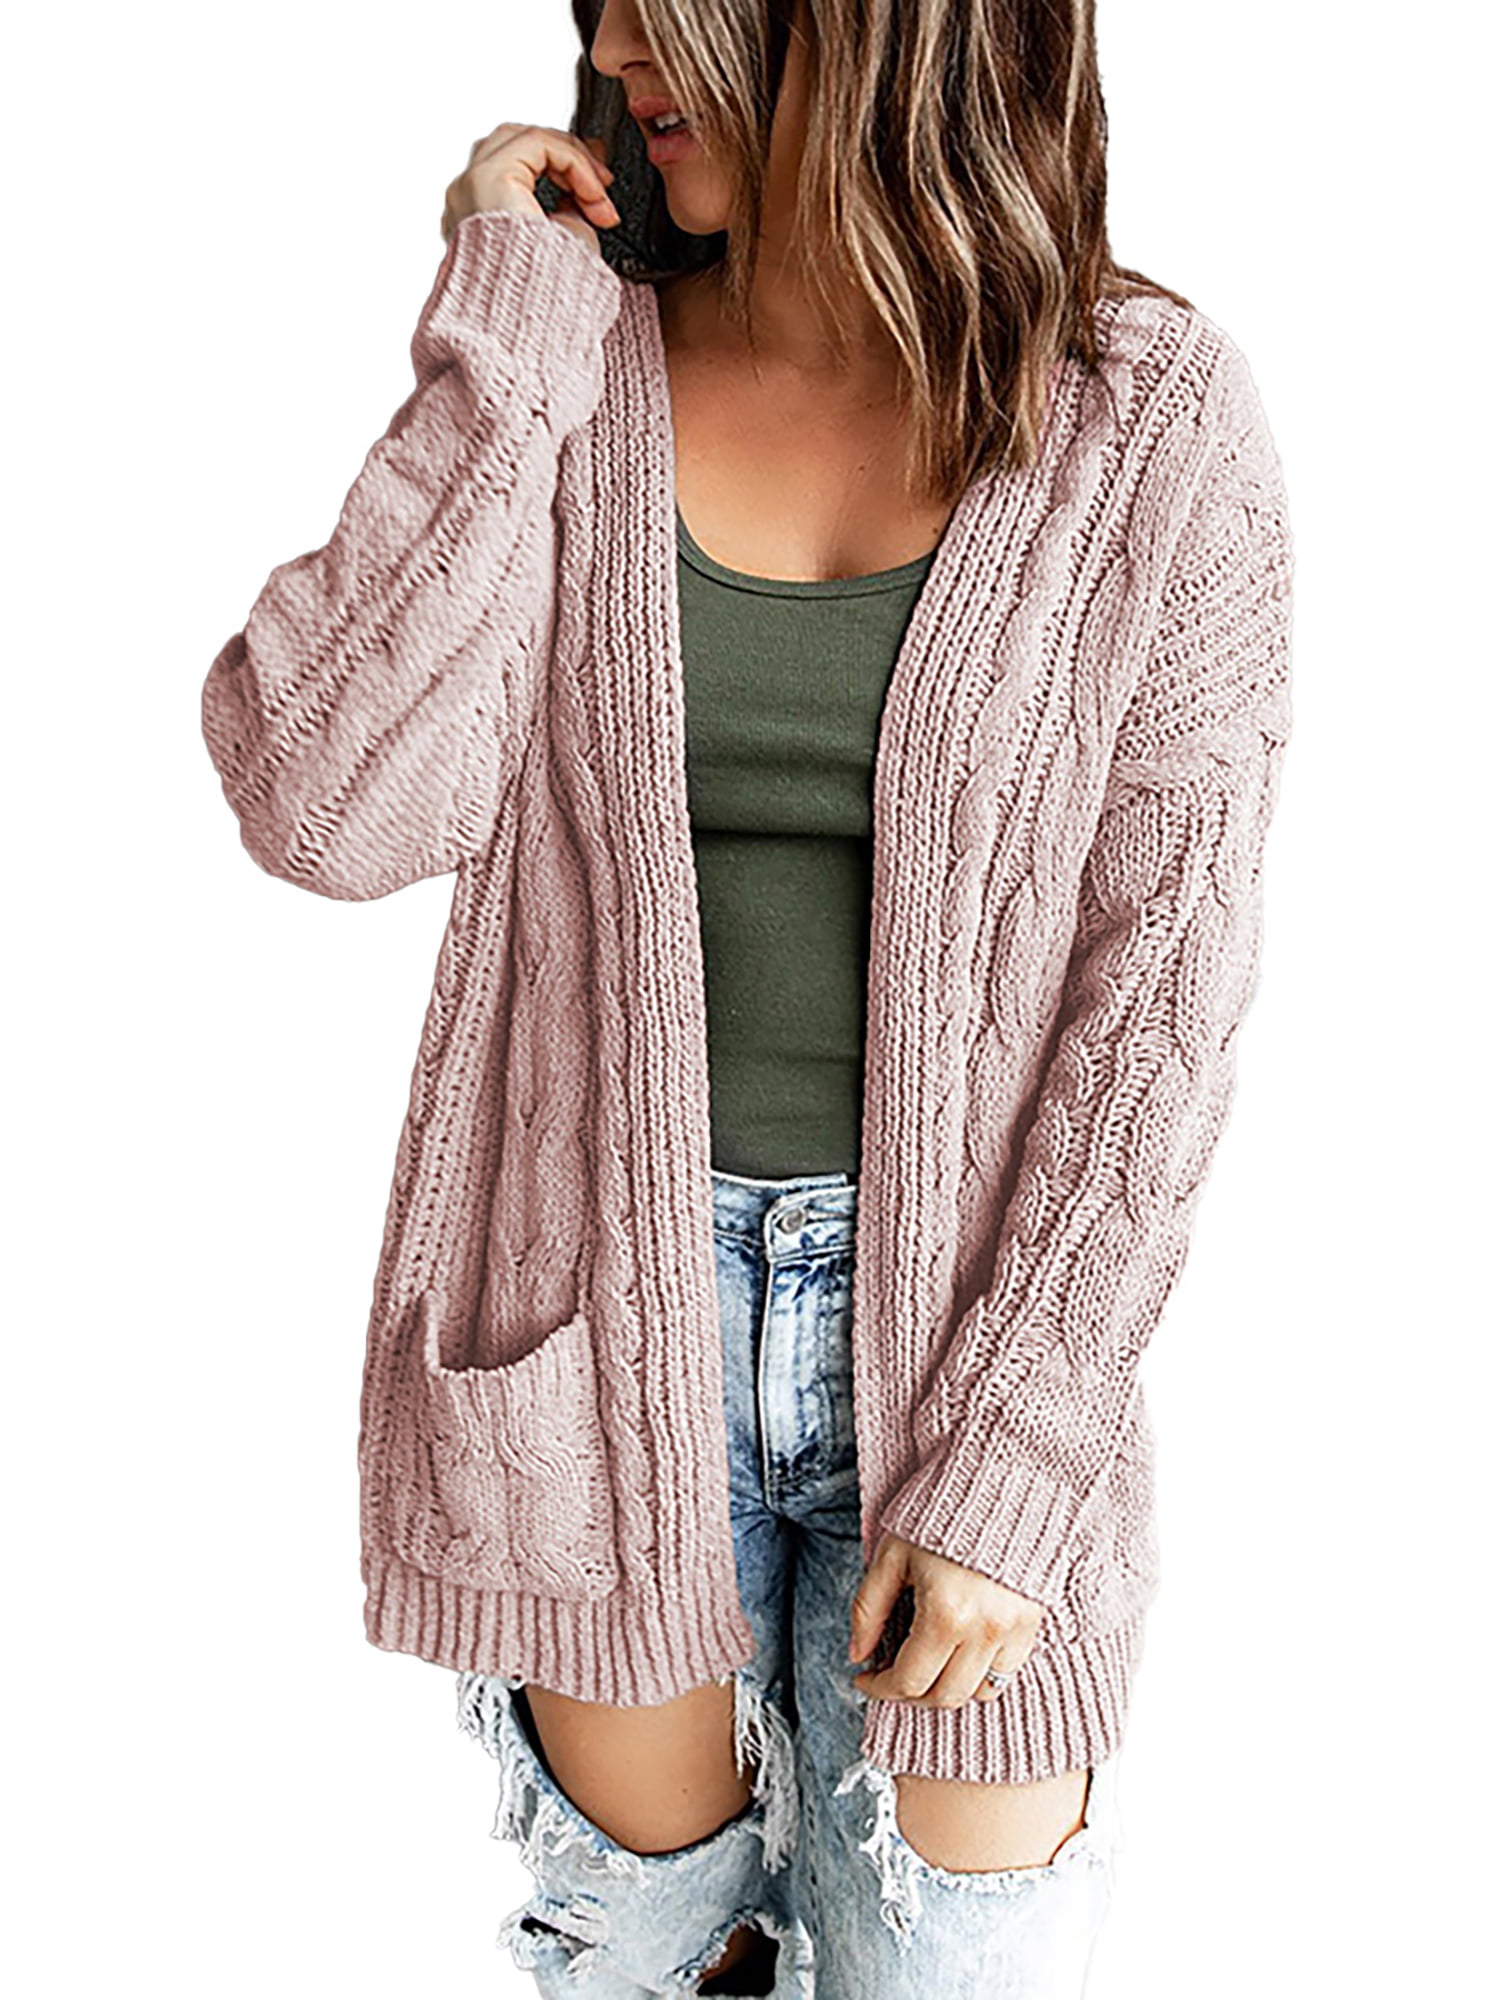 JULYCLO Womens Cable Knit Long Sleeve Cardigans Open Front Buttons Sweater with Pockets Apricot Medium 